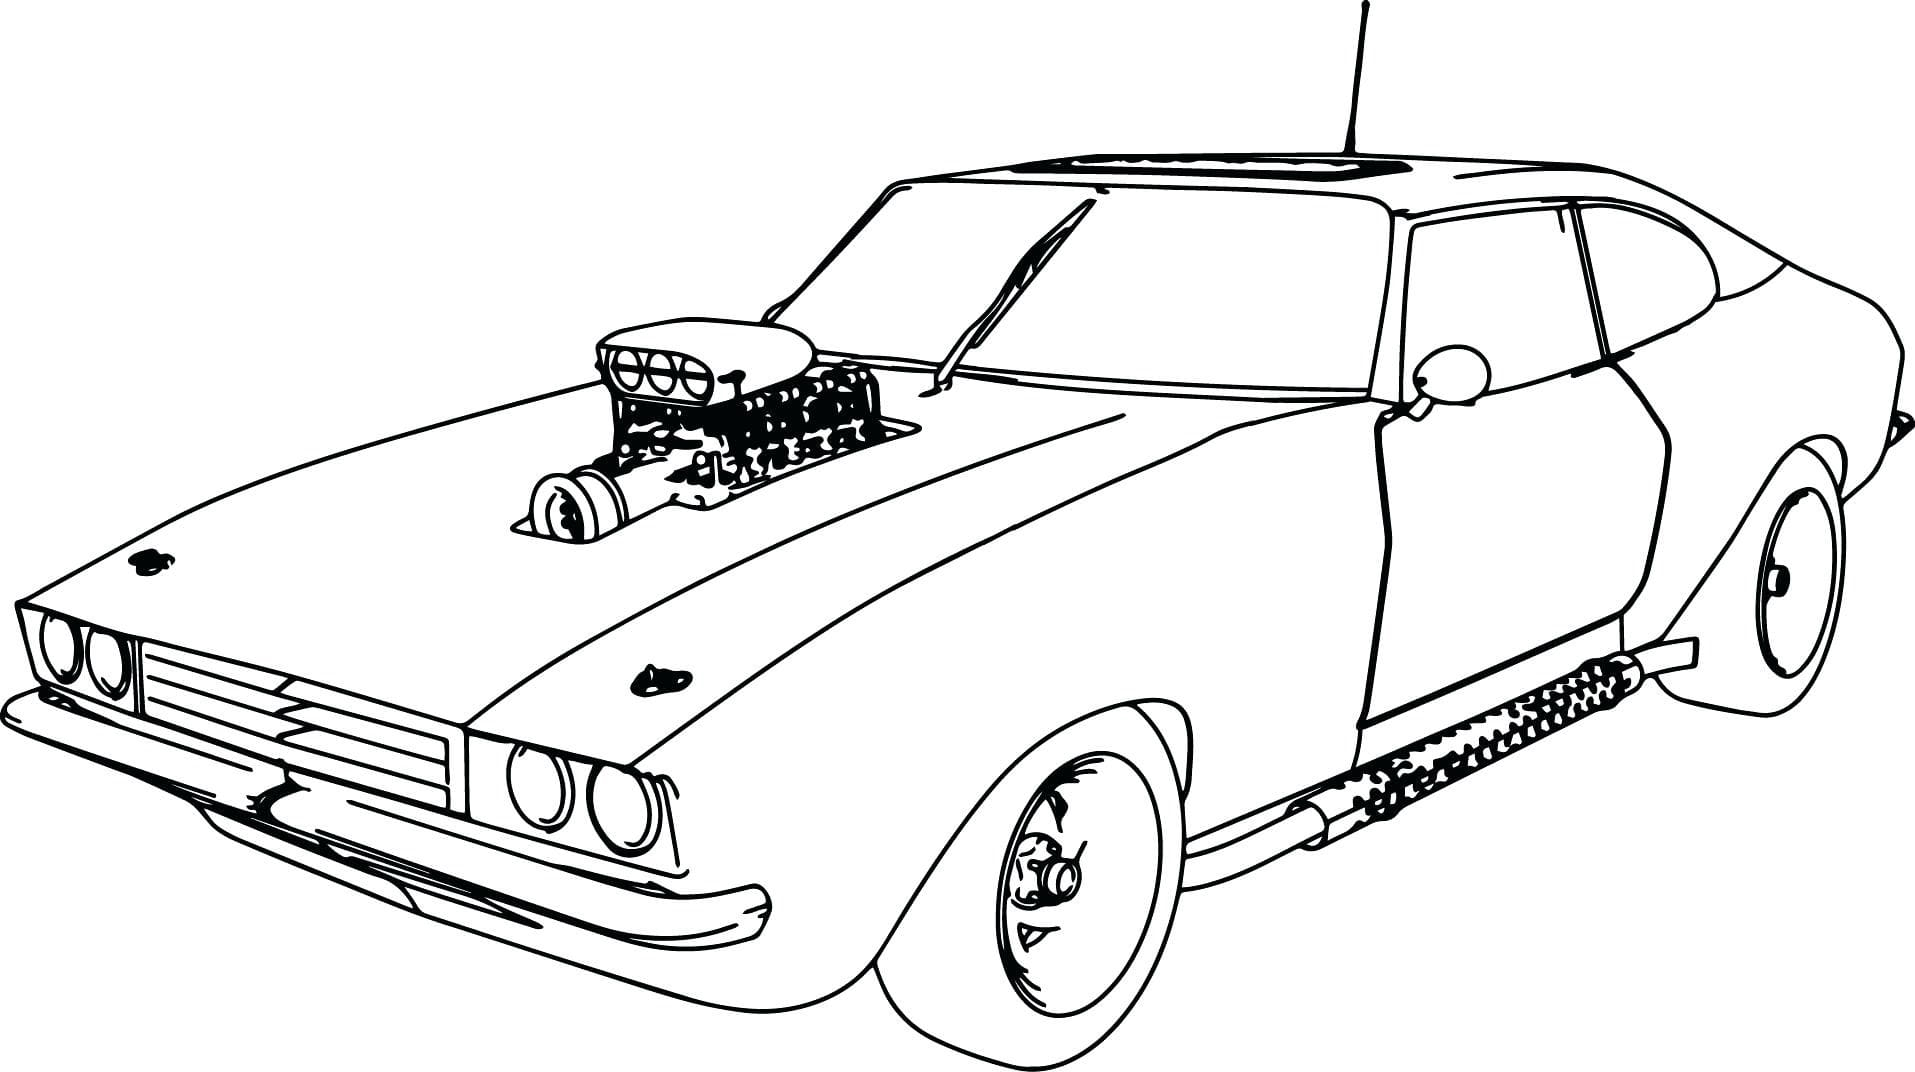 Super Awesome Car Coloring Page Free Printable Coloring Pages. 